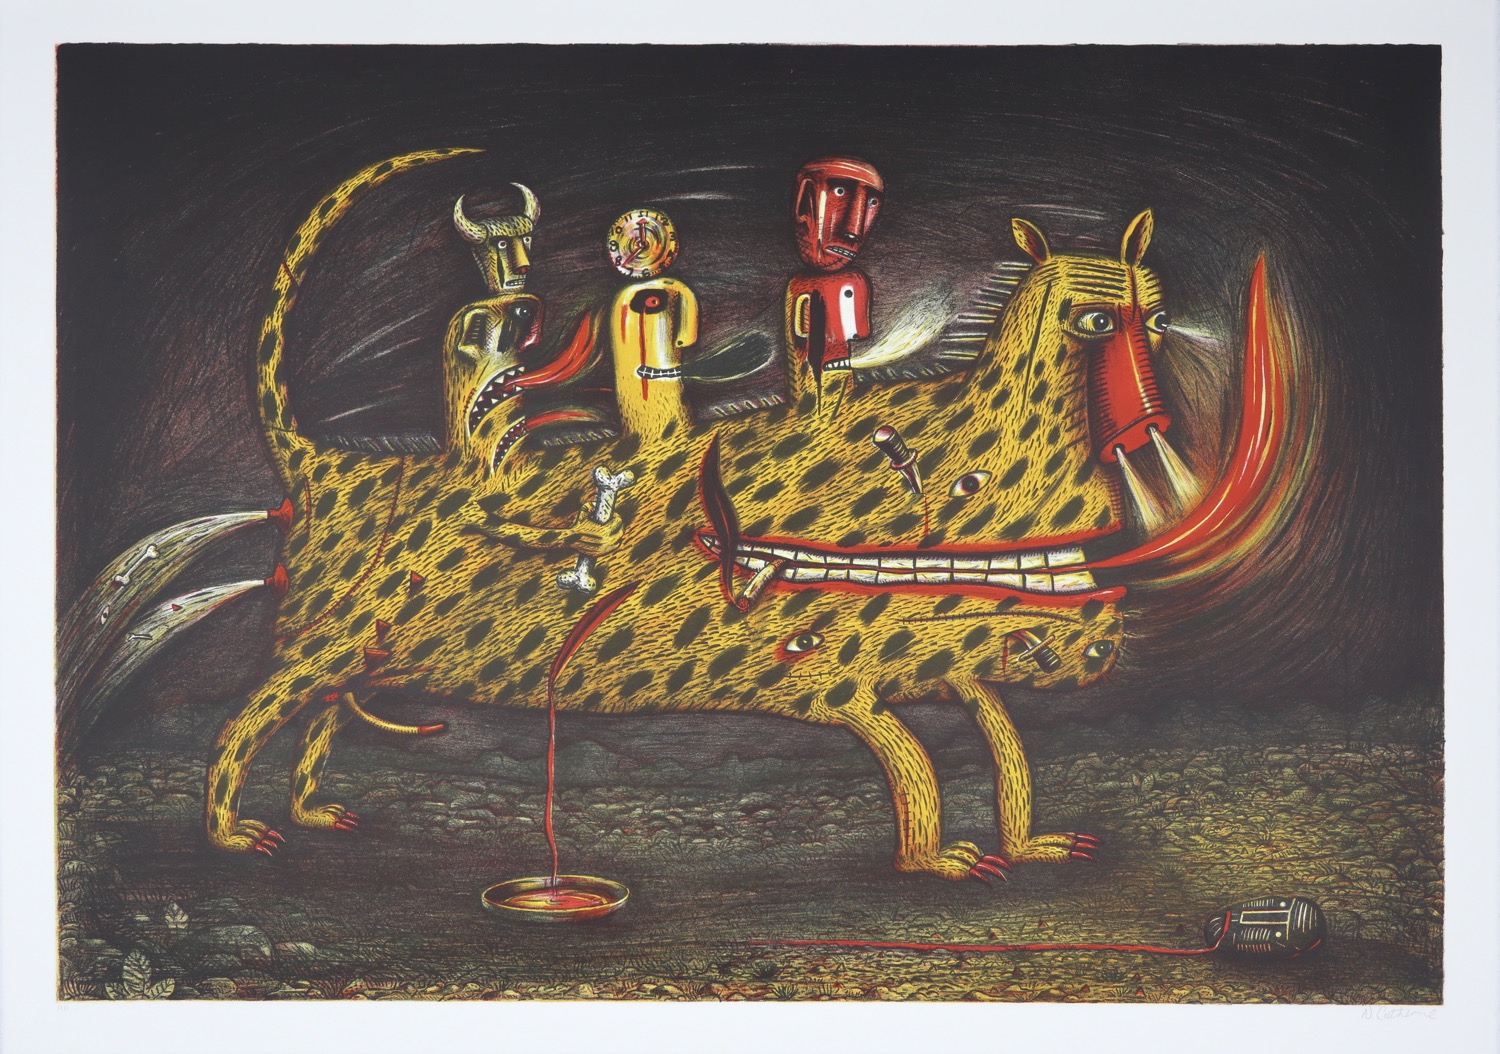 A spotted dog-like creature with multiple eyes being ridden by multi-headed animals.